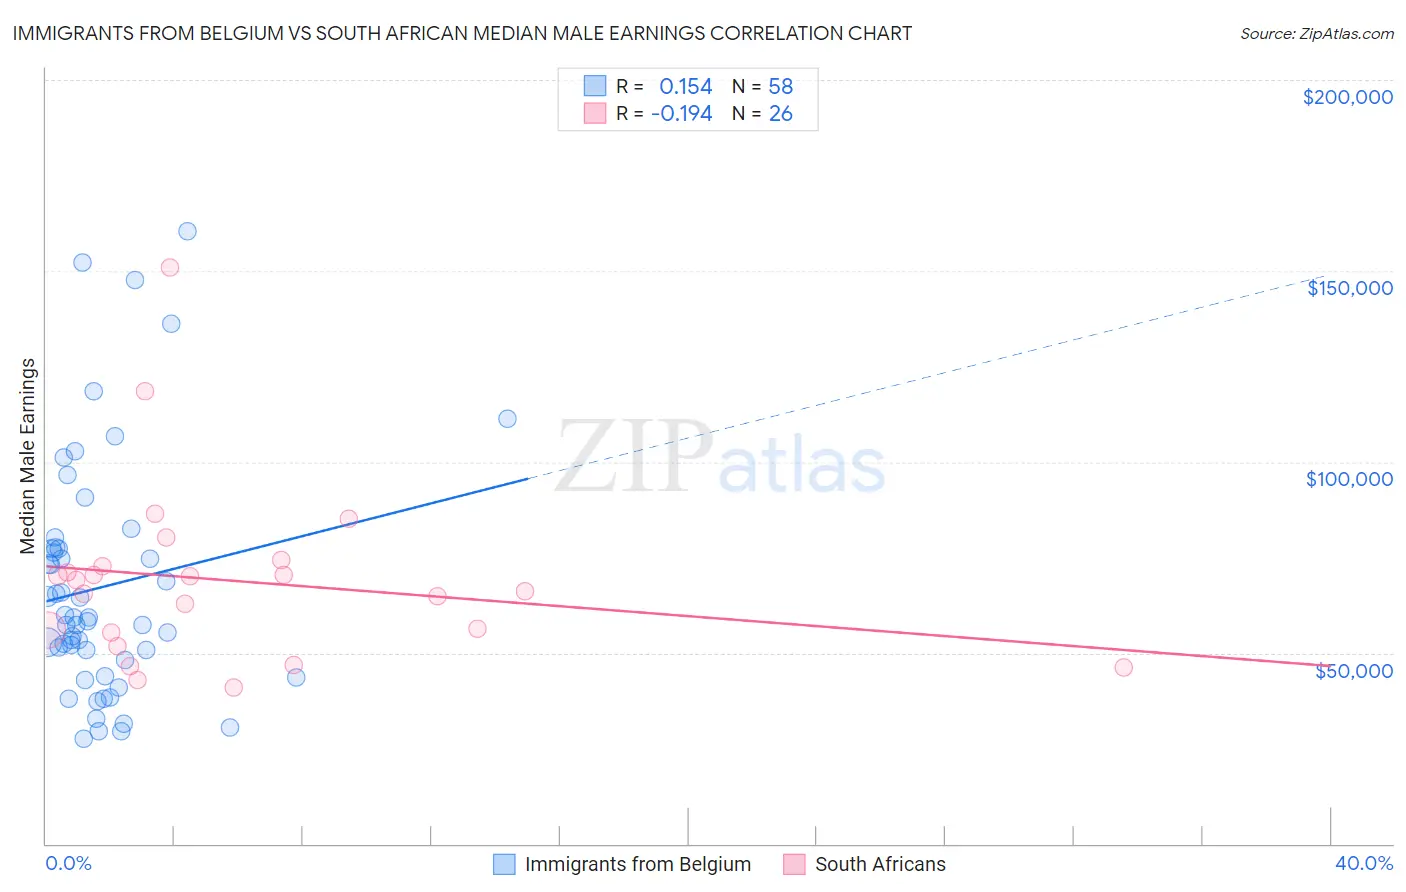 Immigrants from Belgium vs South African Median Male Earnings